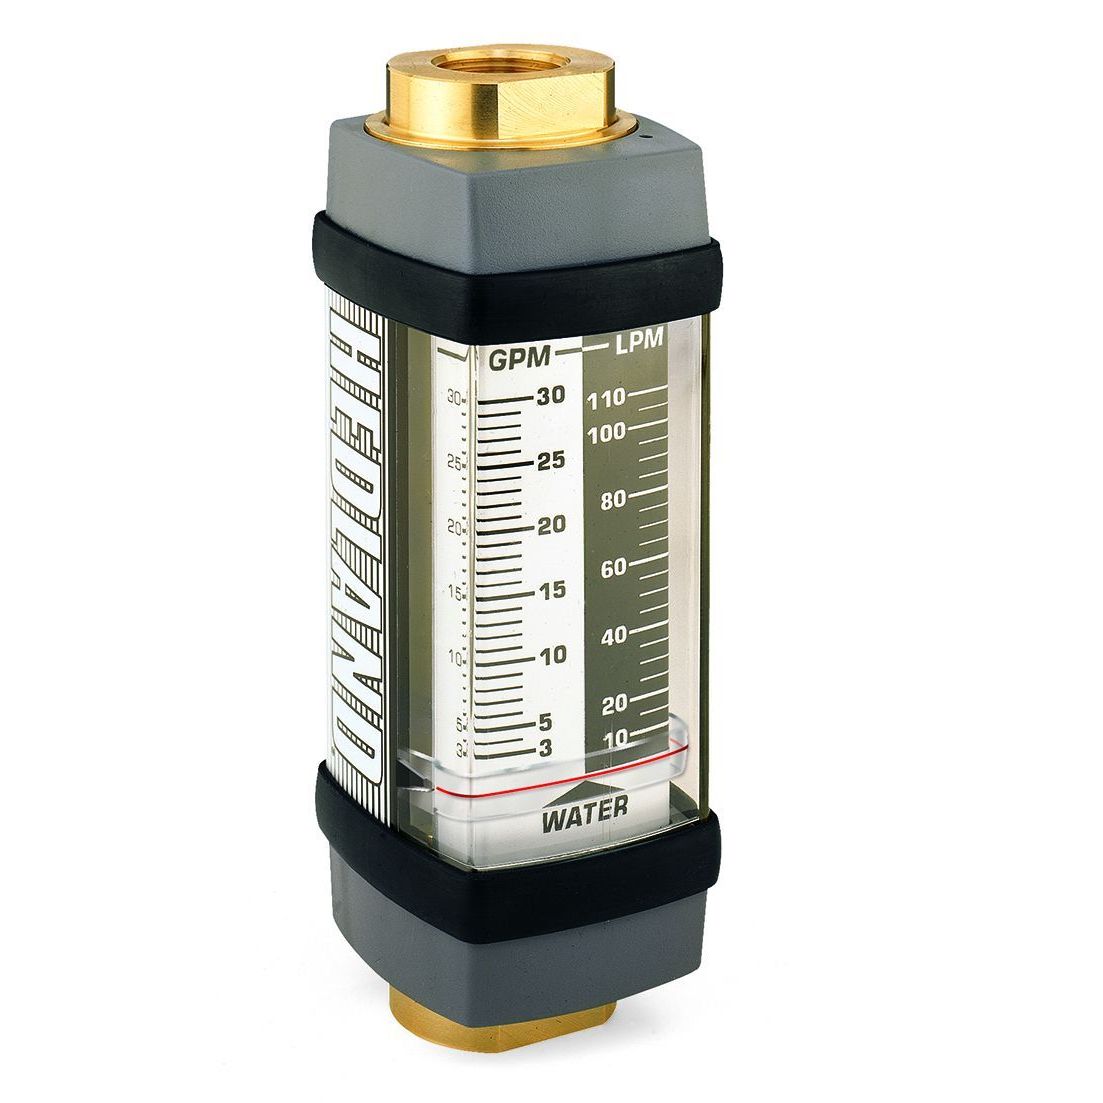 H705B-010 : Hedland 3500psi Brass Flow Meter for Water, 3/4 NPT, 0.1 to 1.0 GPM